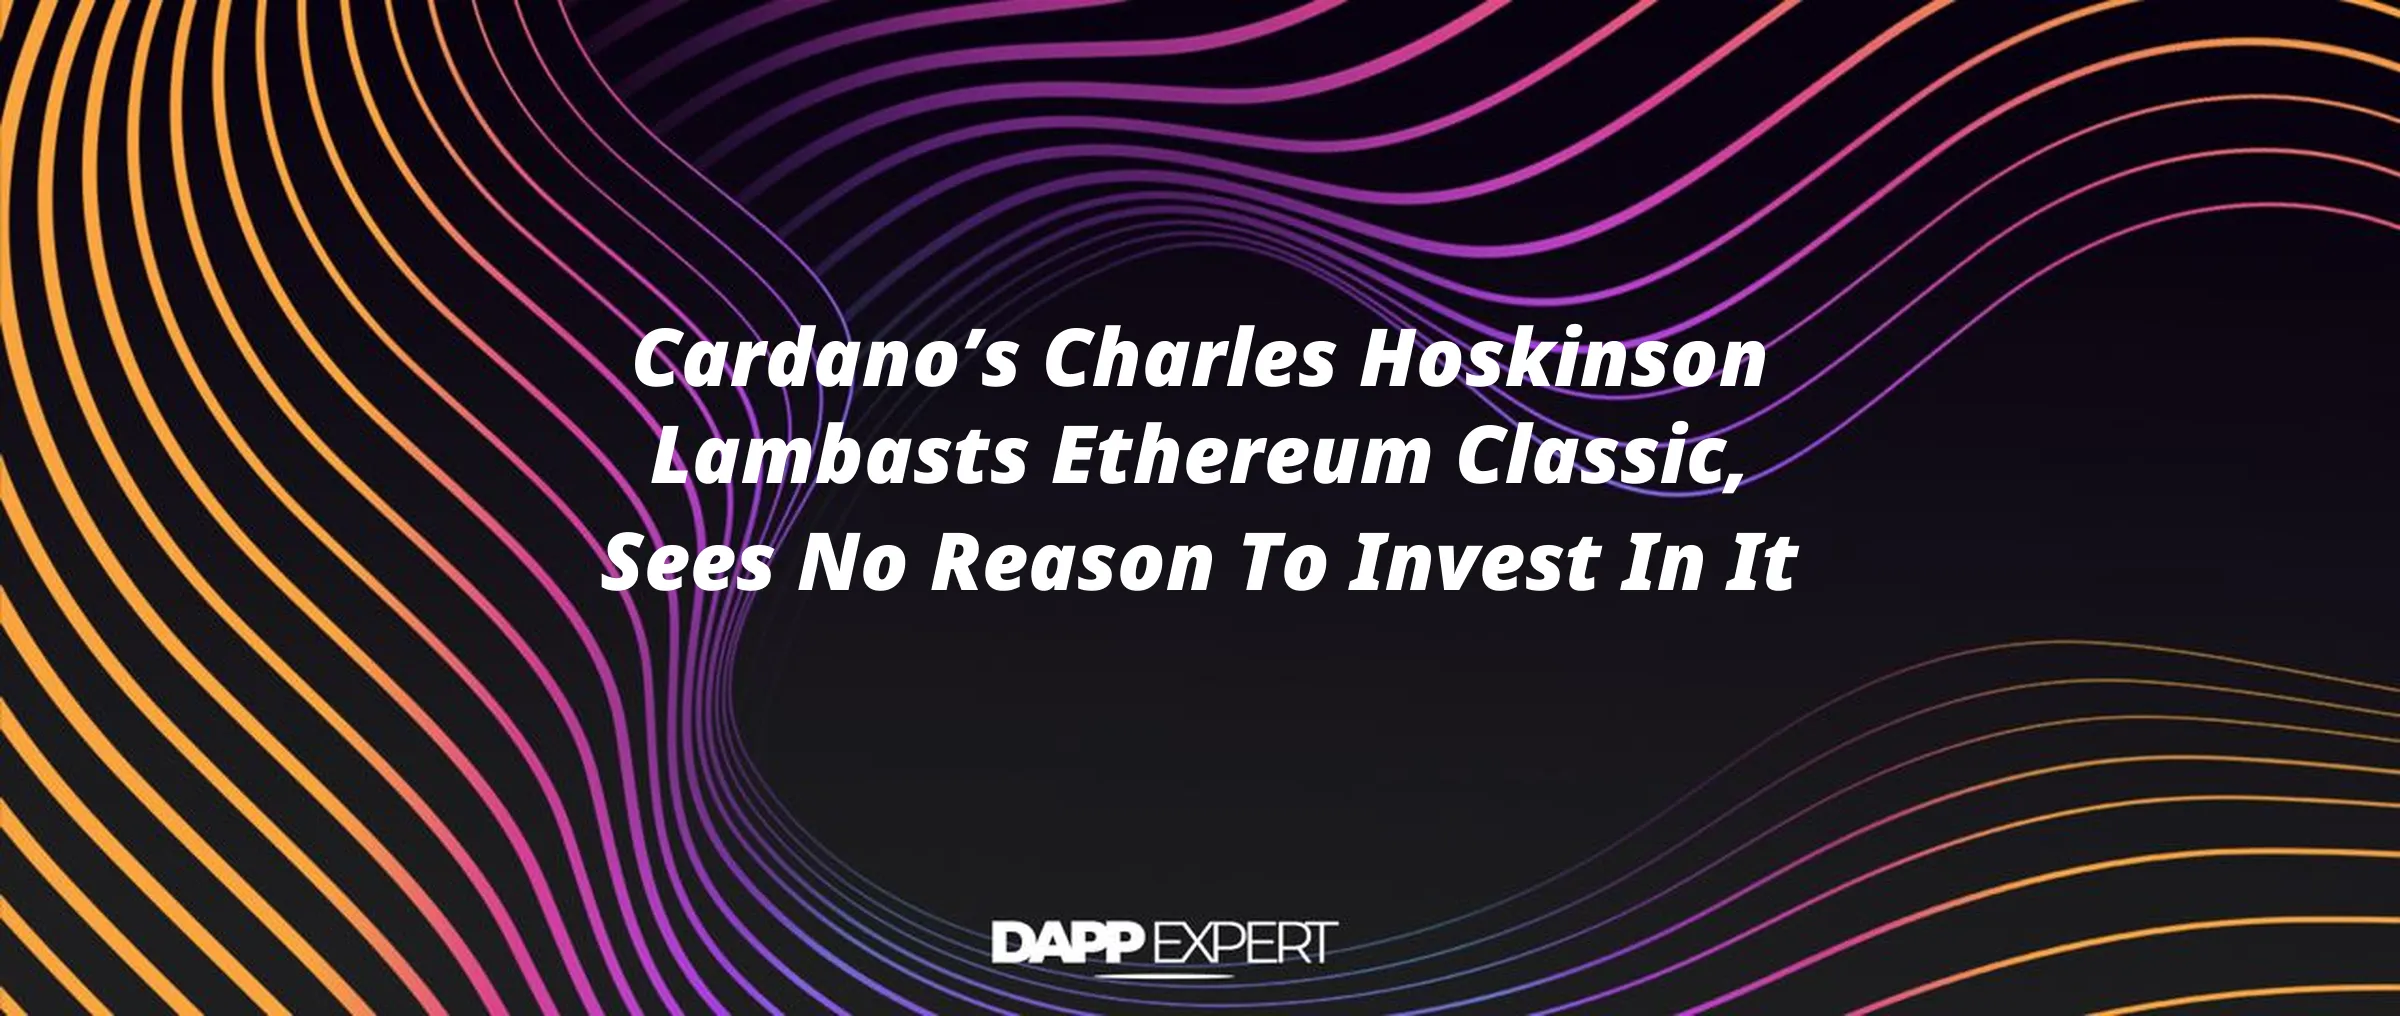 Cardano’s Charles Hoskinson Lambasts Ethereum Classic, Sees No Reason To Invest In It